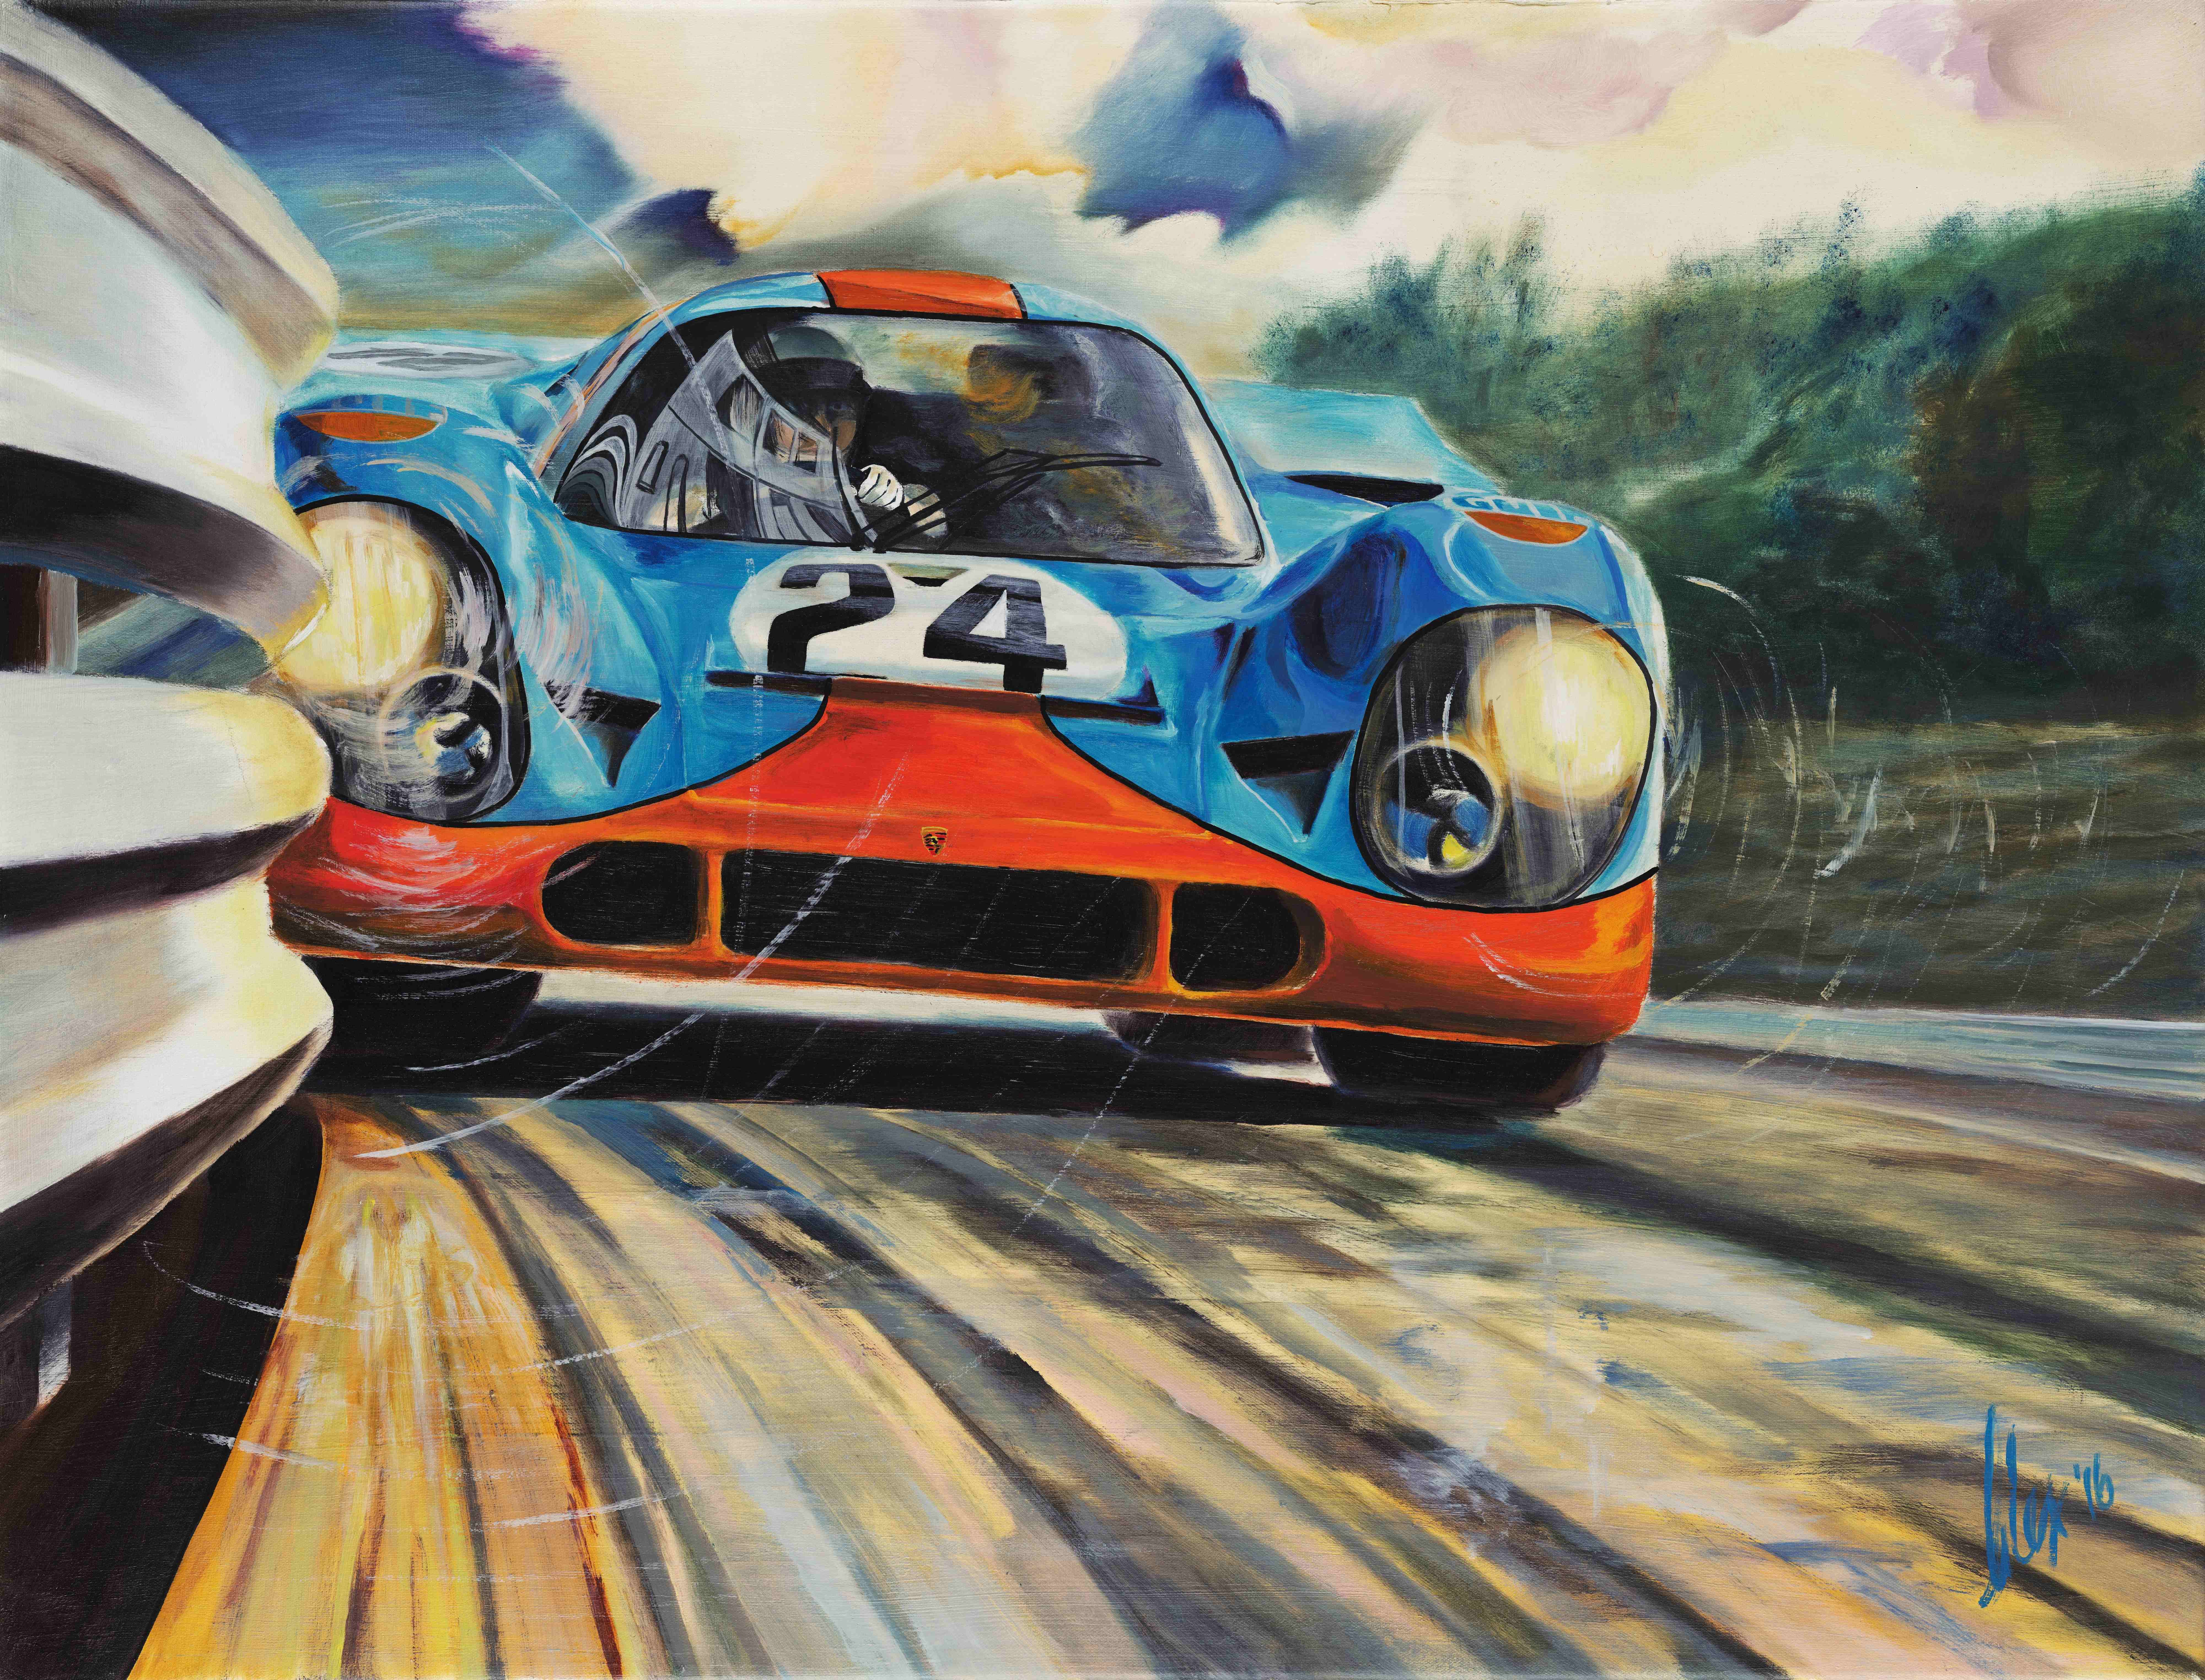 General 8000x6097 artwork oil painting Gulf-Porsche 917 Alex Wakefield Spa-Francorchamps signature frontal view sky clouds vehicle Porsche German cars Volkswagen Group livery digital art watermarked